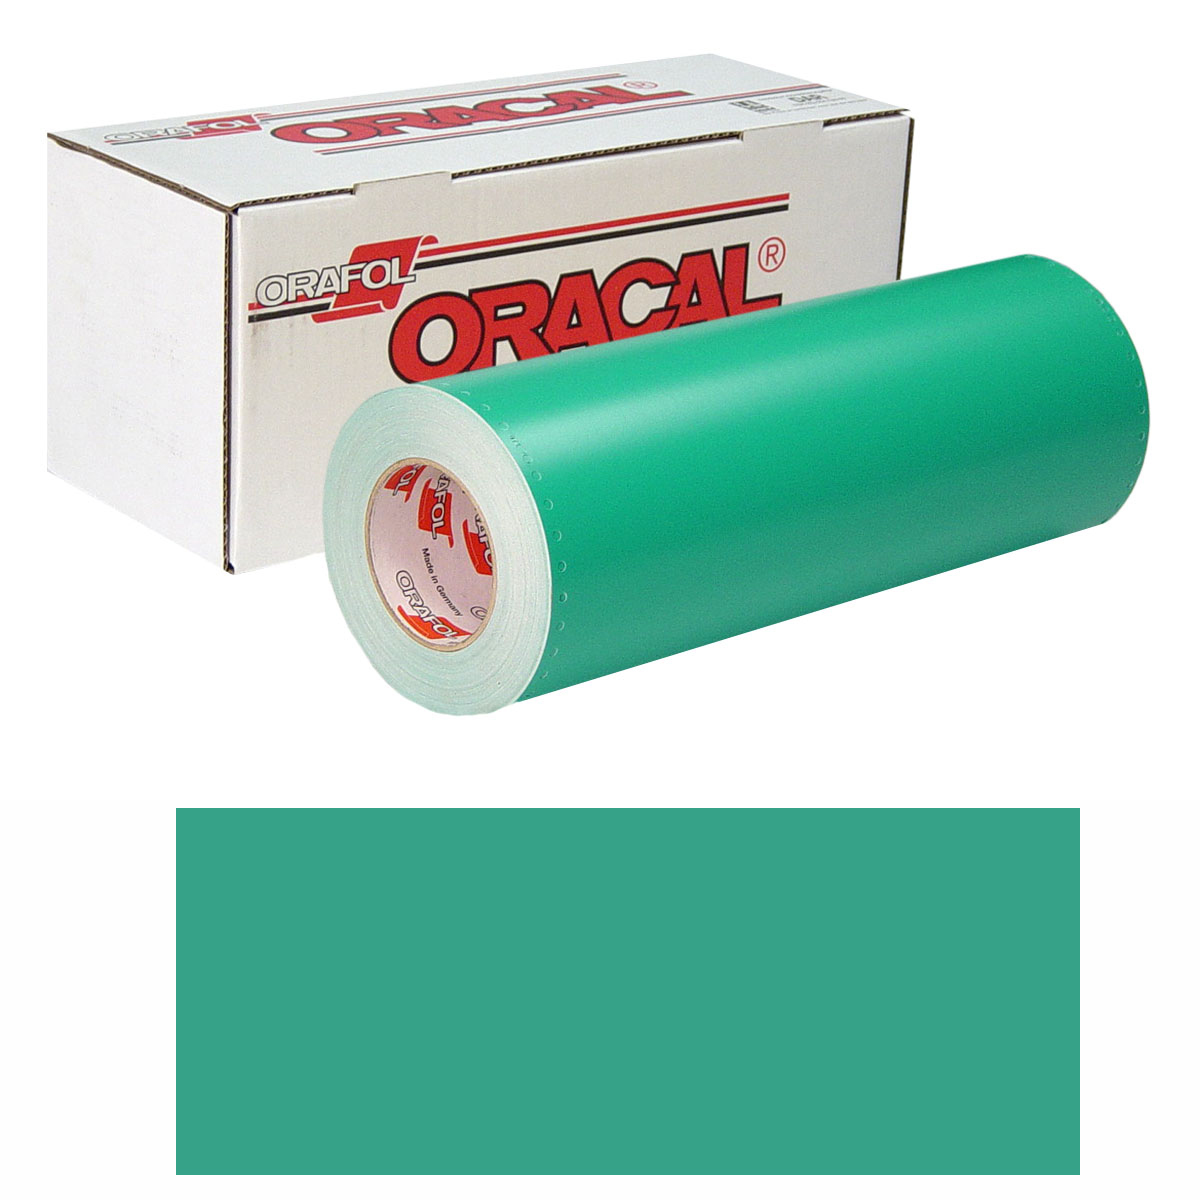 ORACAL 8500 Unp 48in X 50yd 009 Middle Green